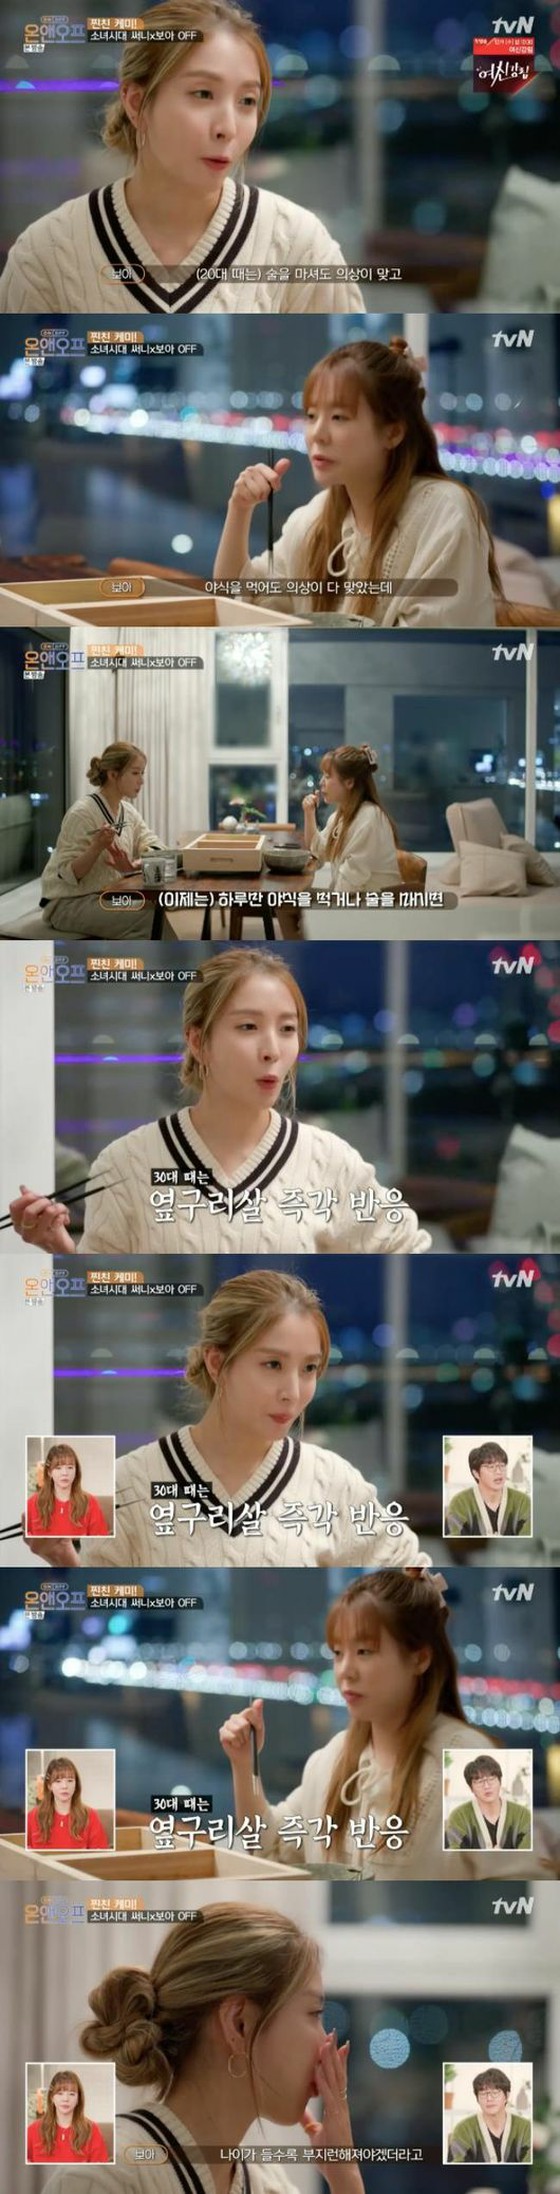 Singers BoA and Sunny (SNSD), "The bodies of people in their twenties and thirties are different ... When you eat a midnight snack, the meat on your side reacts immediately."